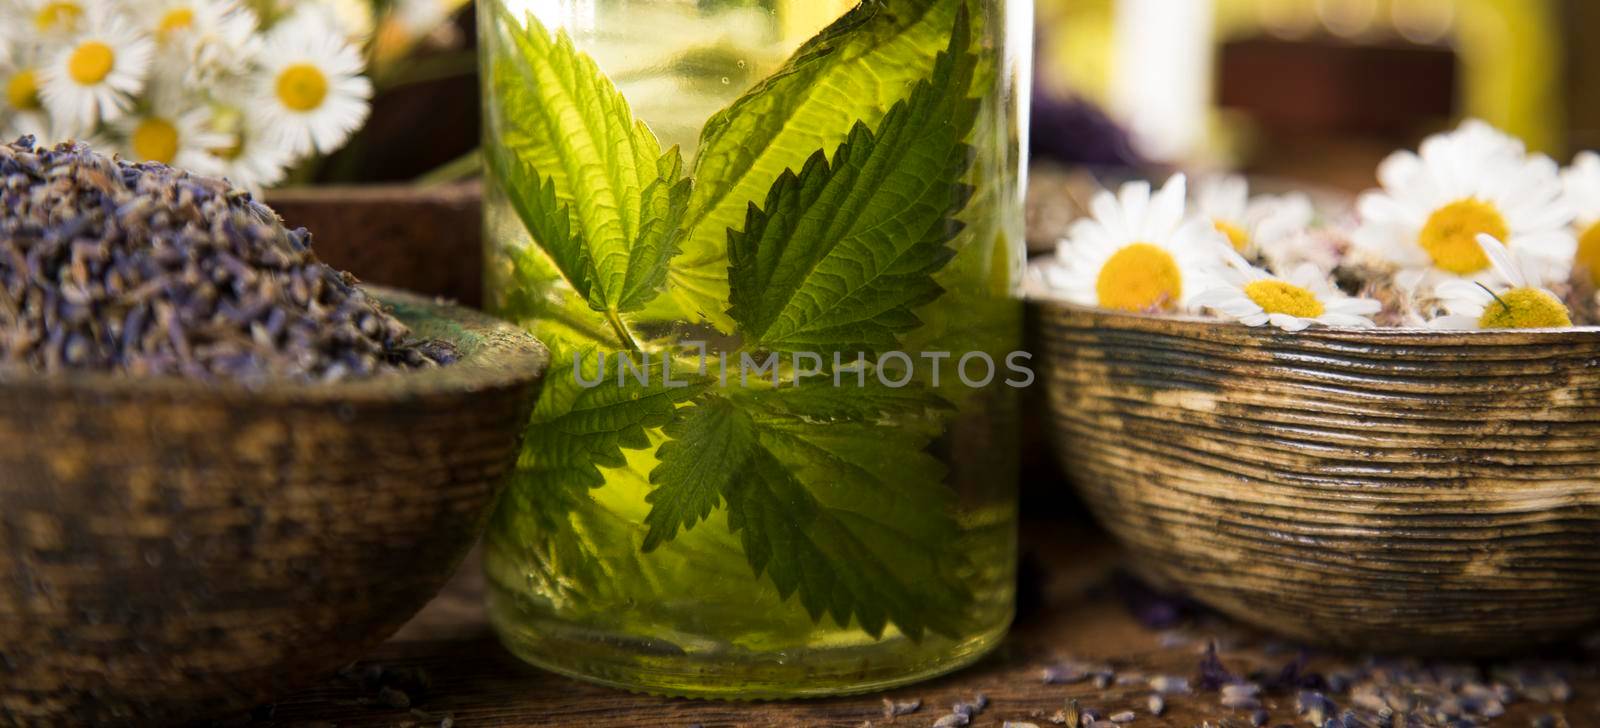 Natural medicine and mortar, healing herbs background by JanPietruszka